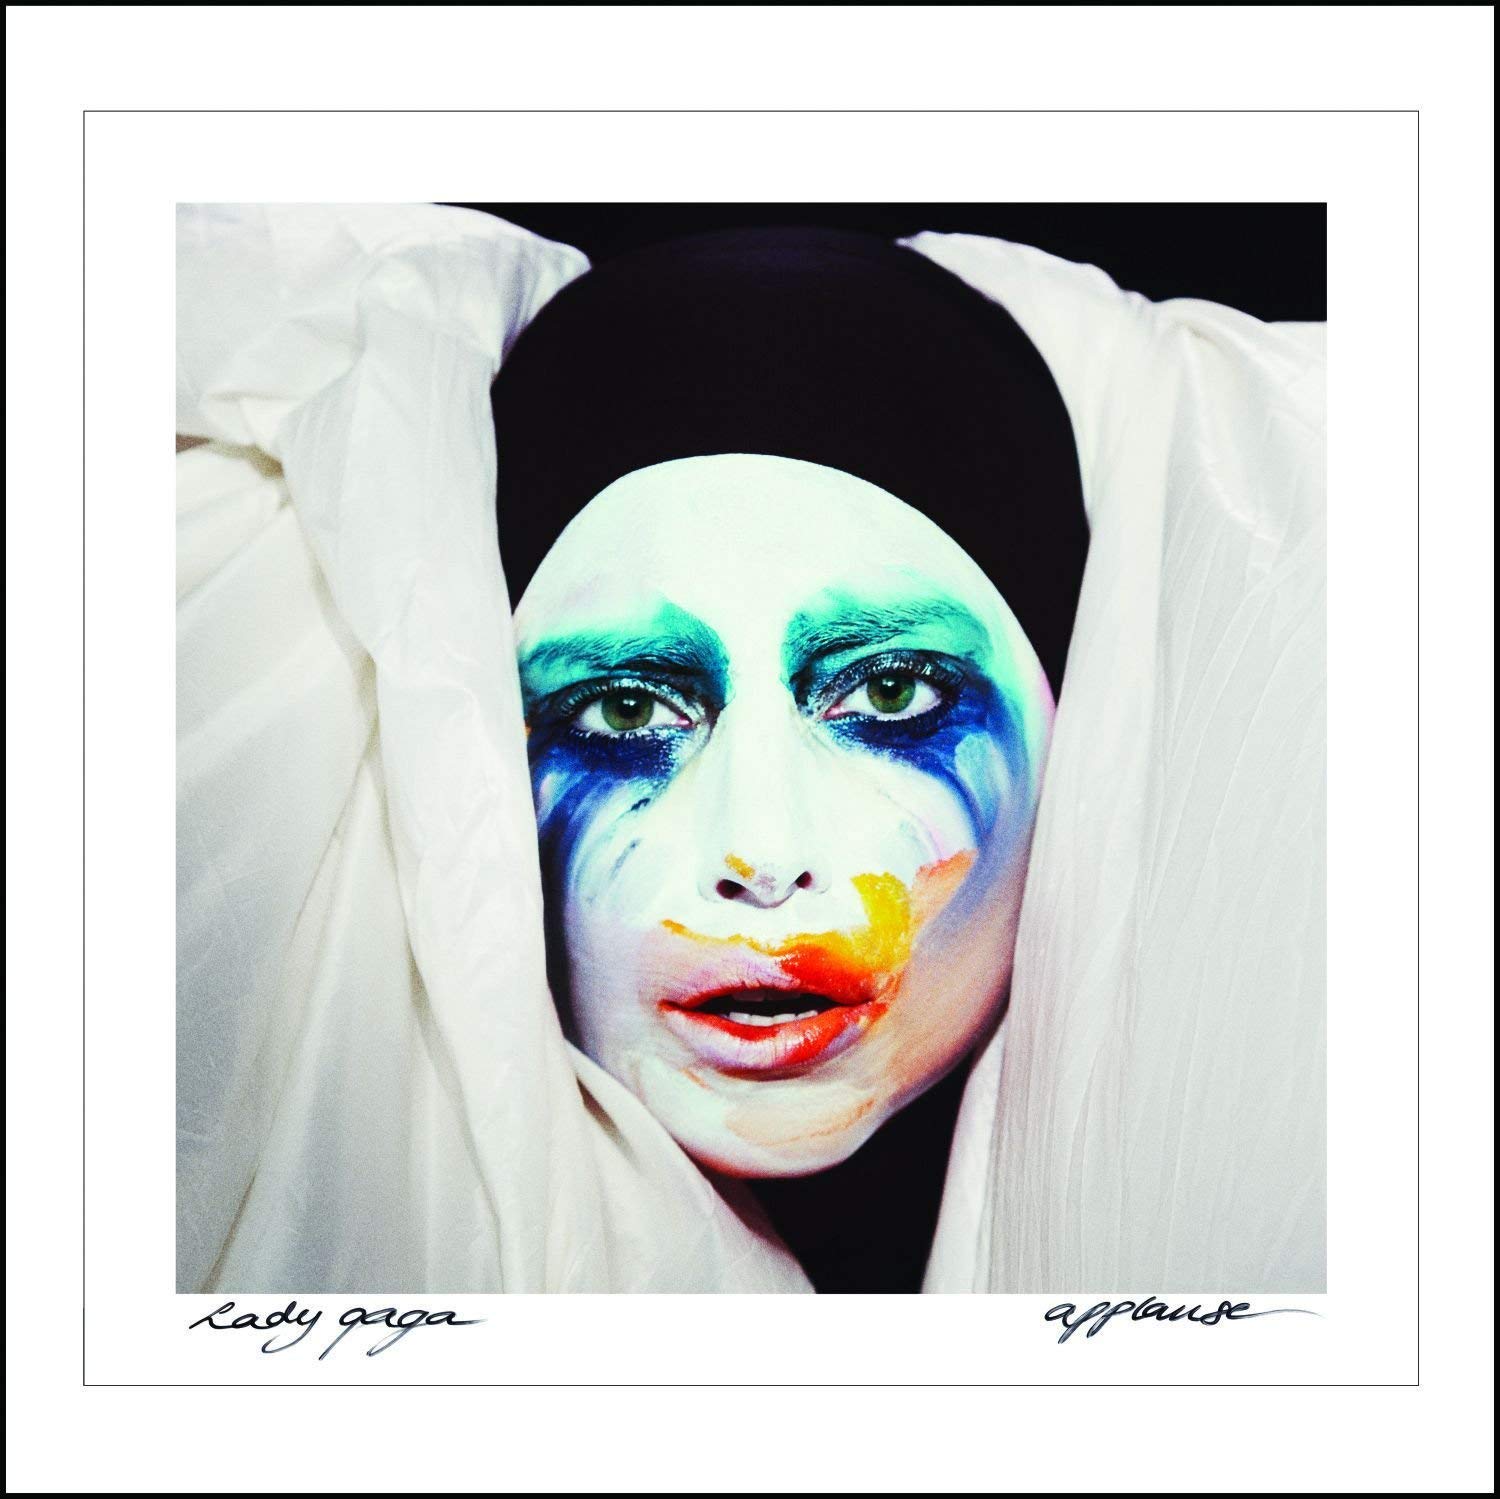 Applause single cover